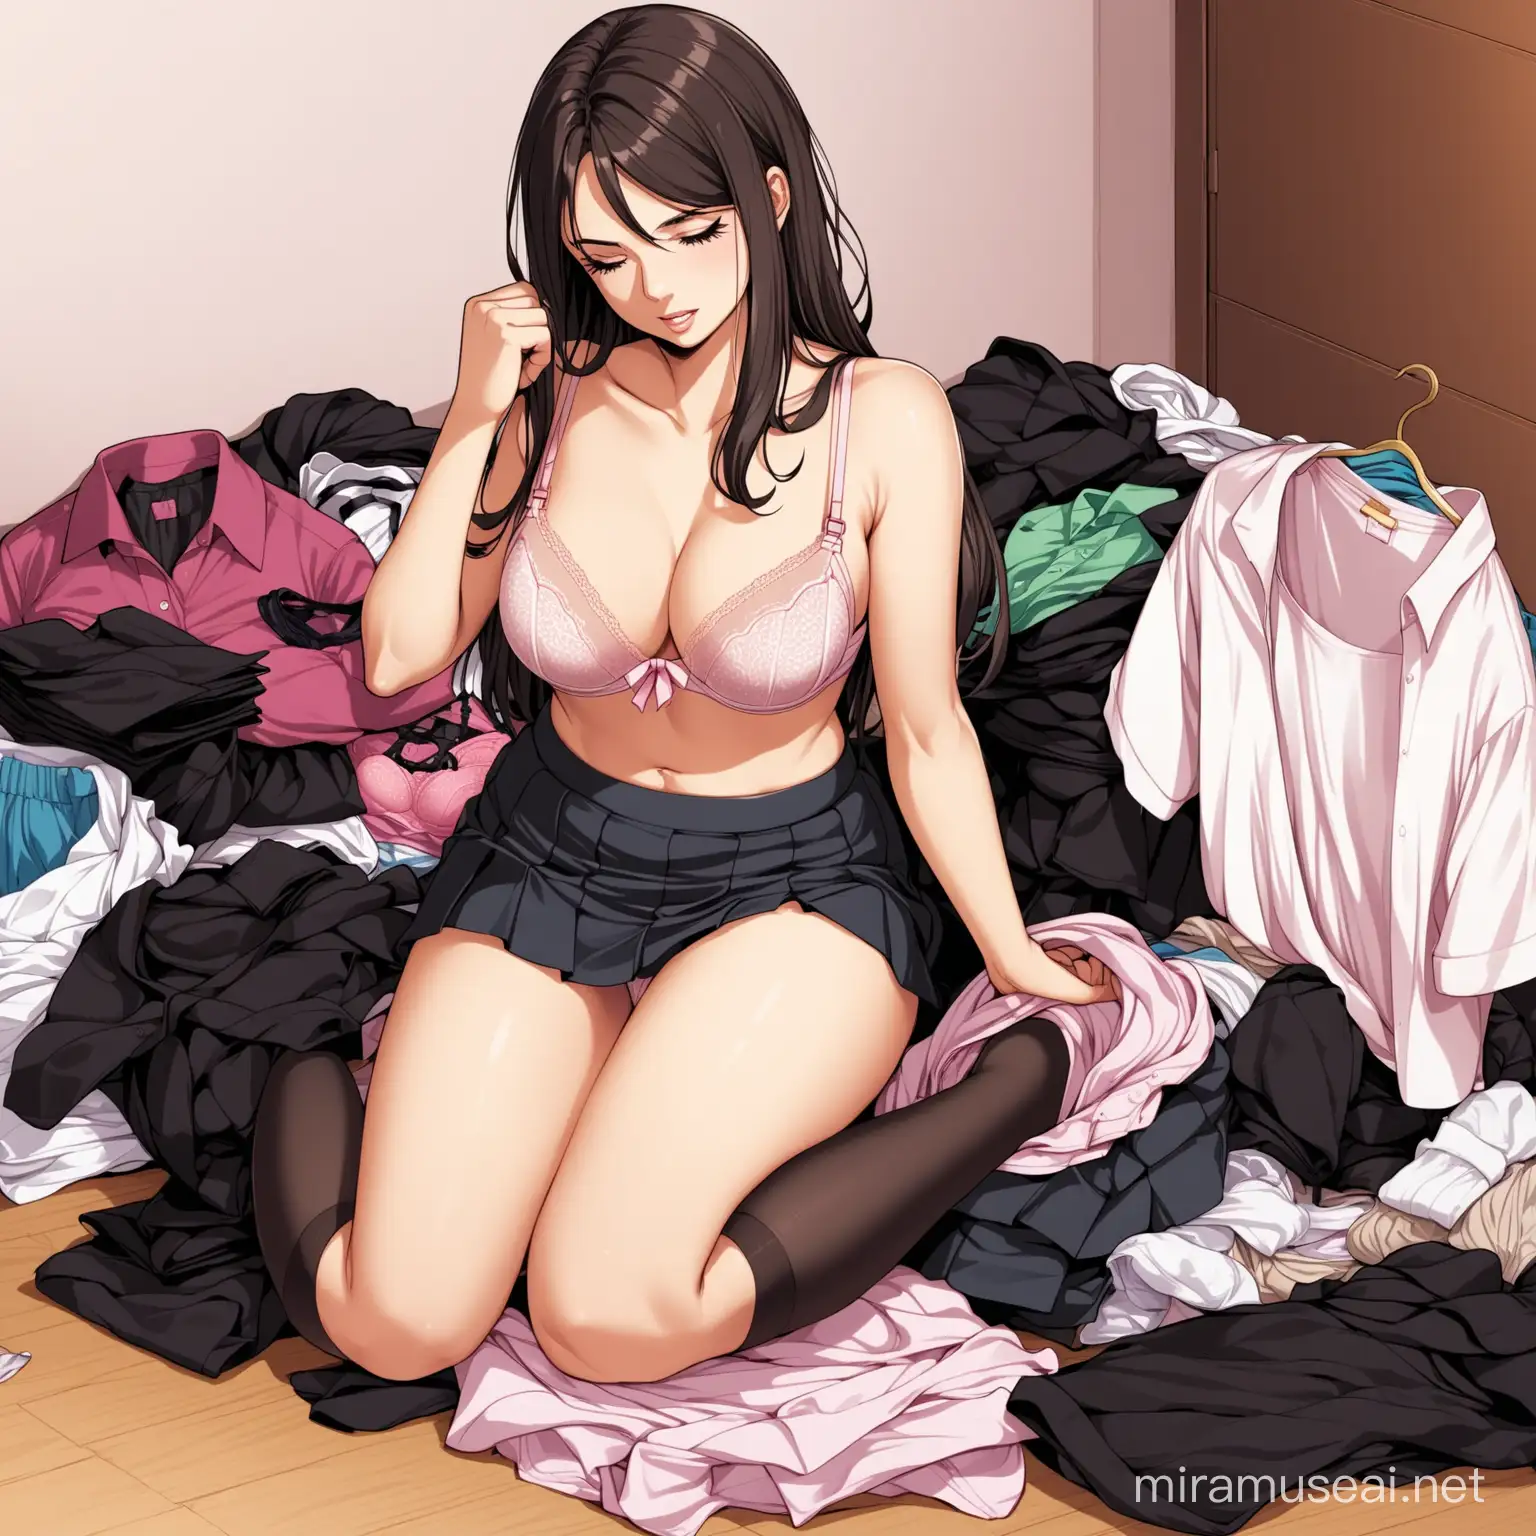 Marla, stripping her blouse, skirt, stocking, bra, underwear, pile of discarded clothes